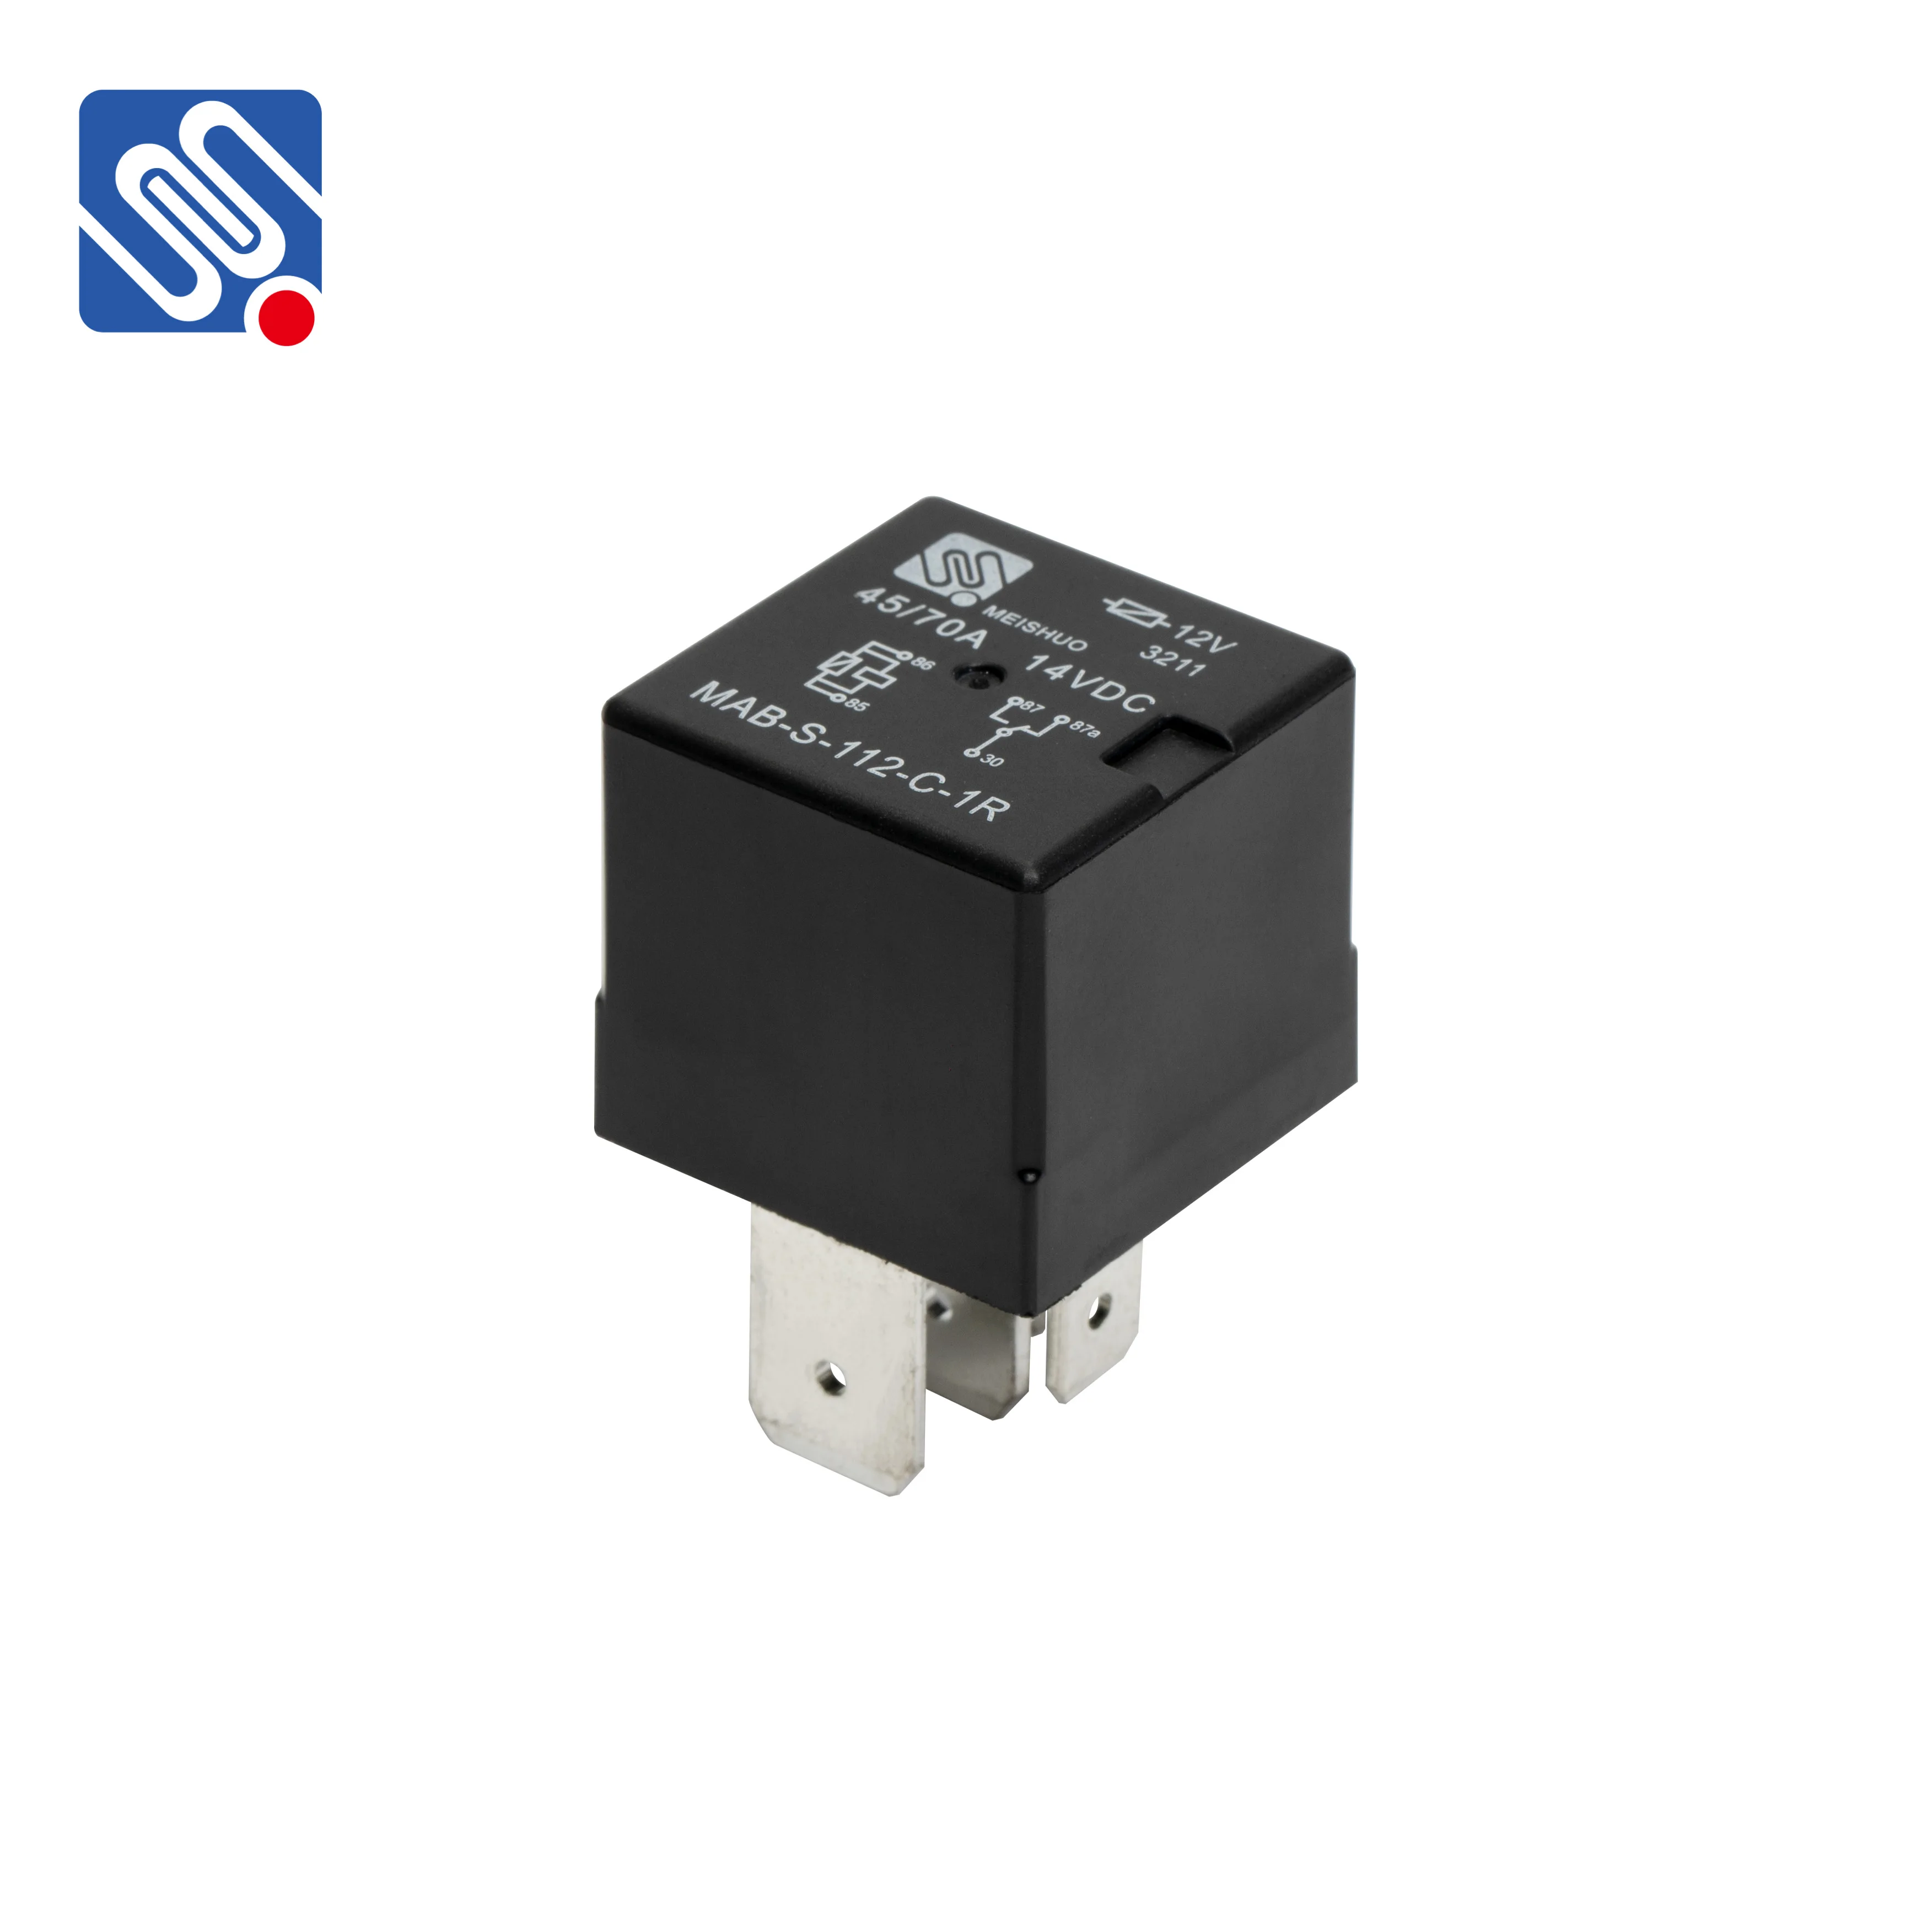 Meishuo MAB-S-112-C-1R 5 pin auto relay 45A 70A good price 12v automotive car relay factory